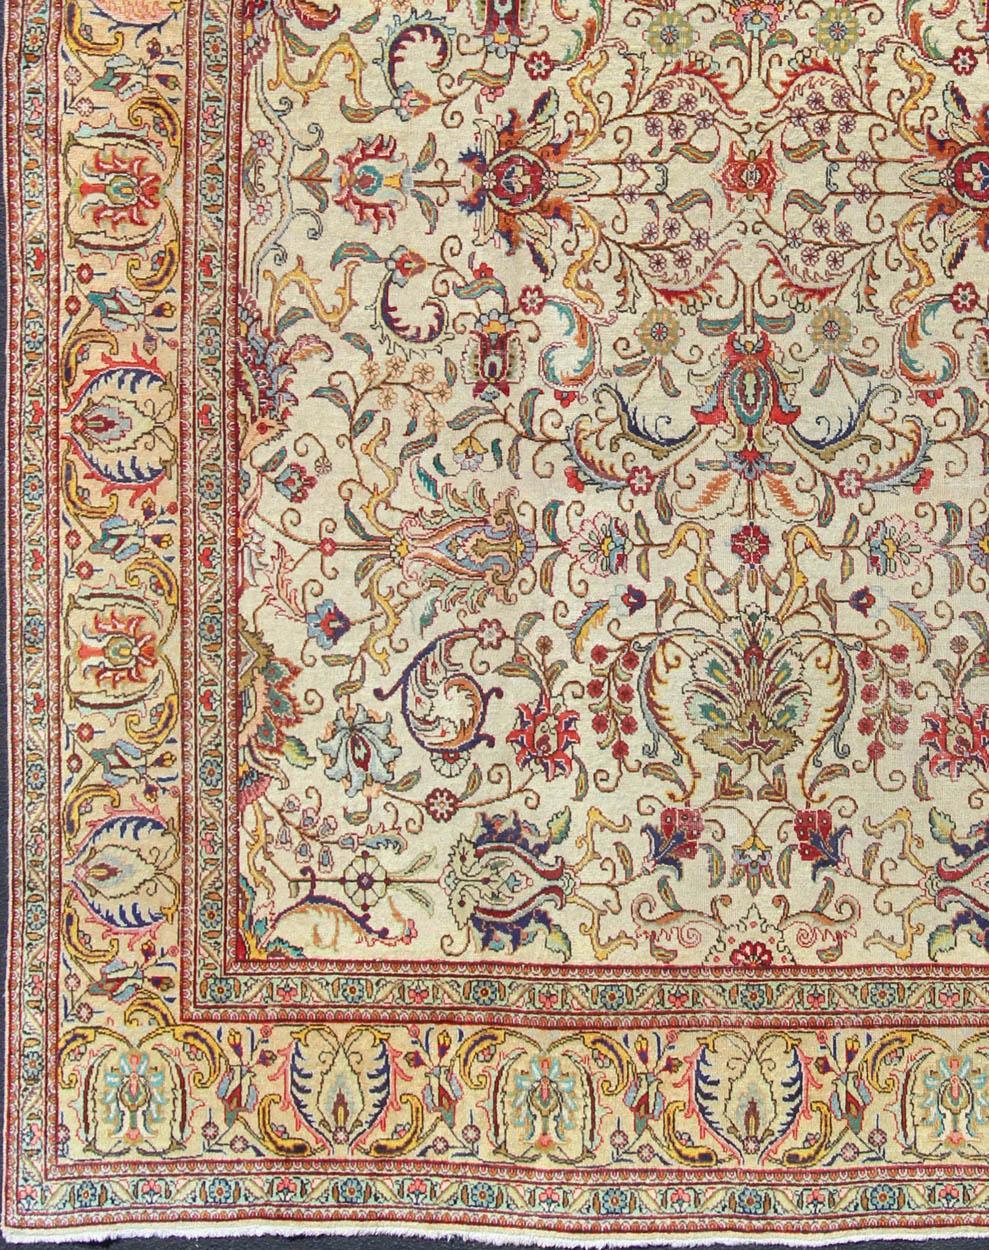 Tabriz Vintage rug from Persia with all-over Floral design in Ivory, red, and taupe, rug kbe-h-411-05, country of origin / type: Iran / Tabriz, circa 1950

This vintage Persian Tabriz carpet (circa mid-20th century) features a refined palate of